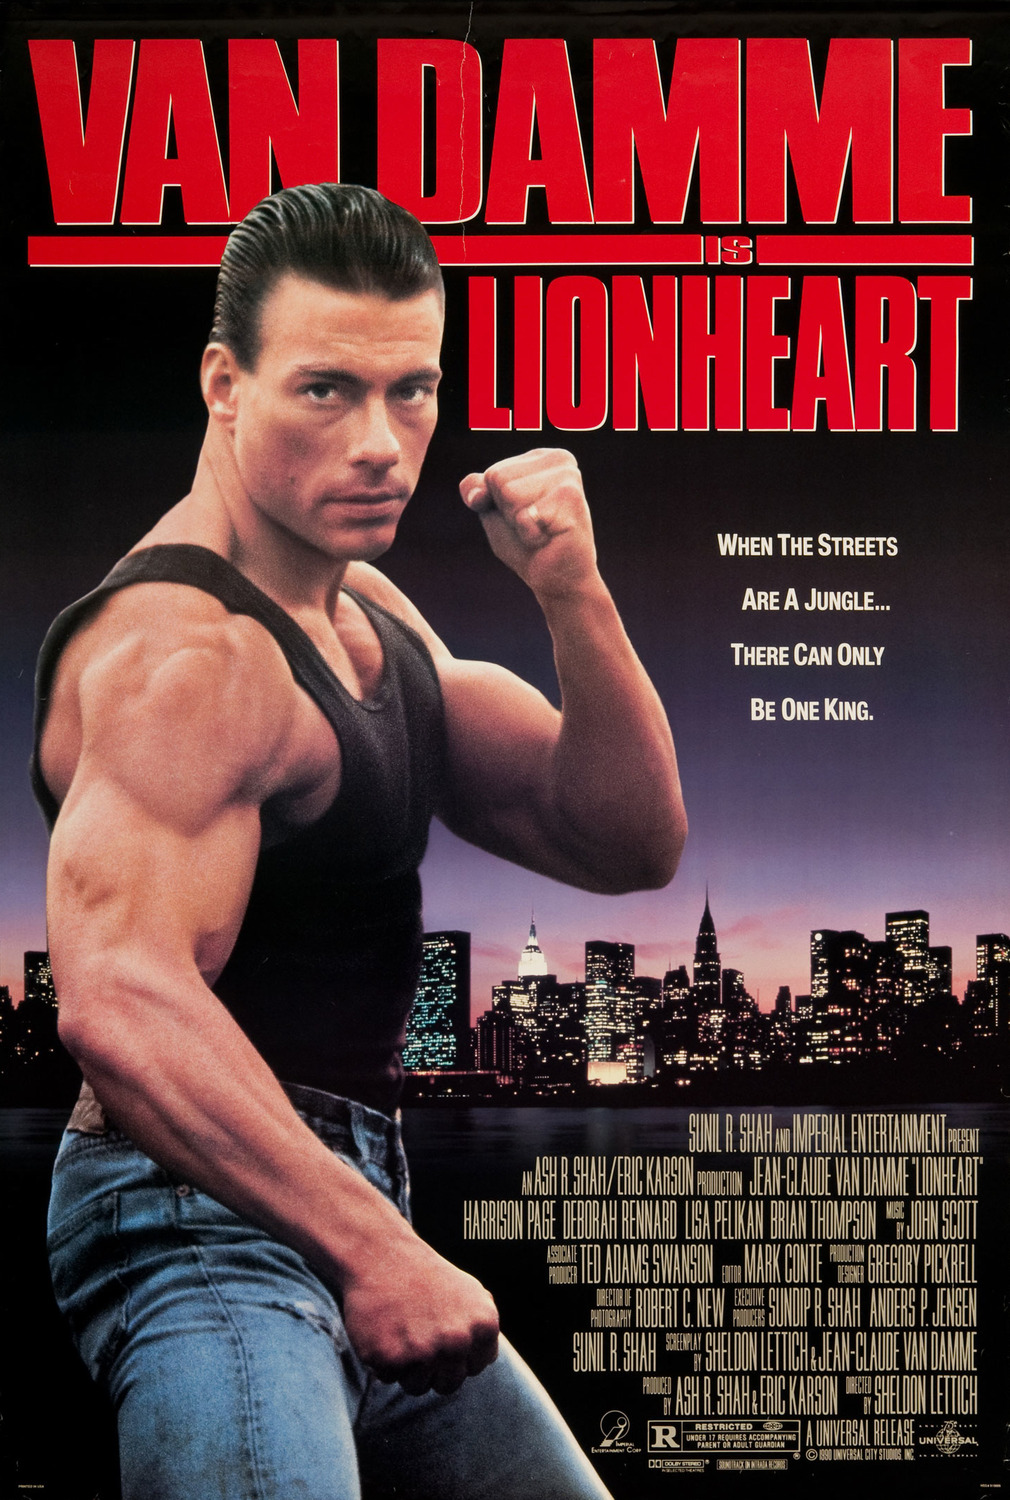 Extra Large Movie Poster Image for Lionheart 